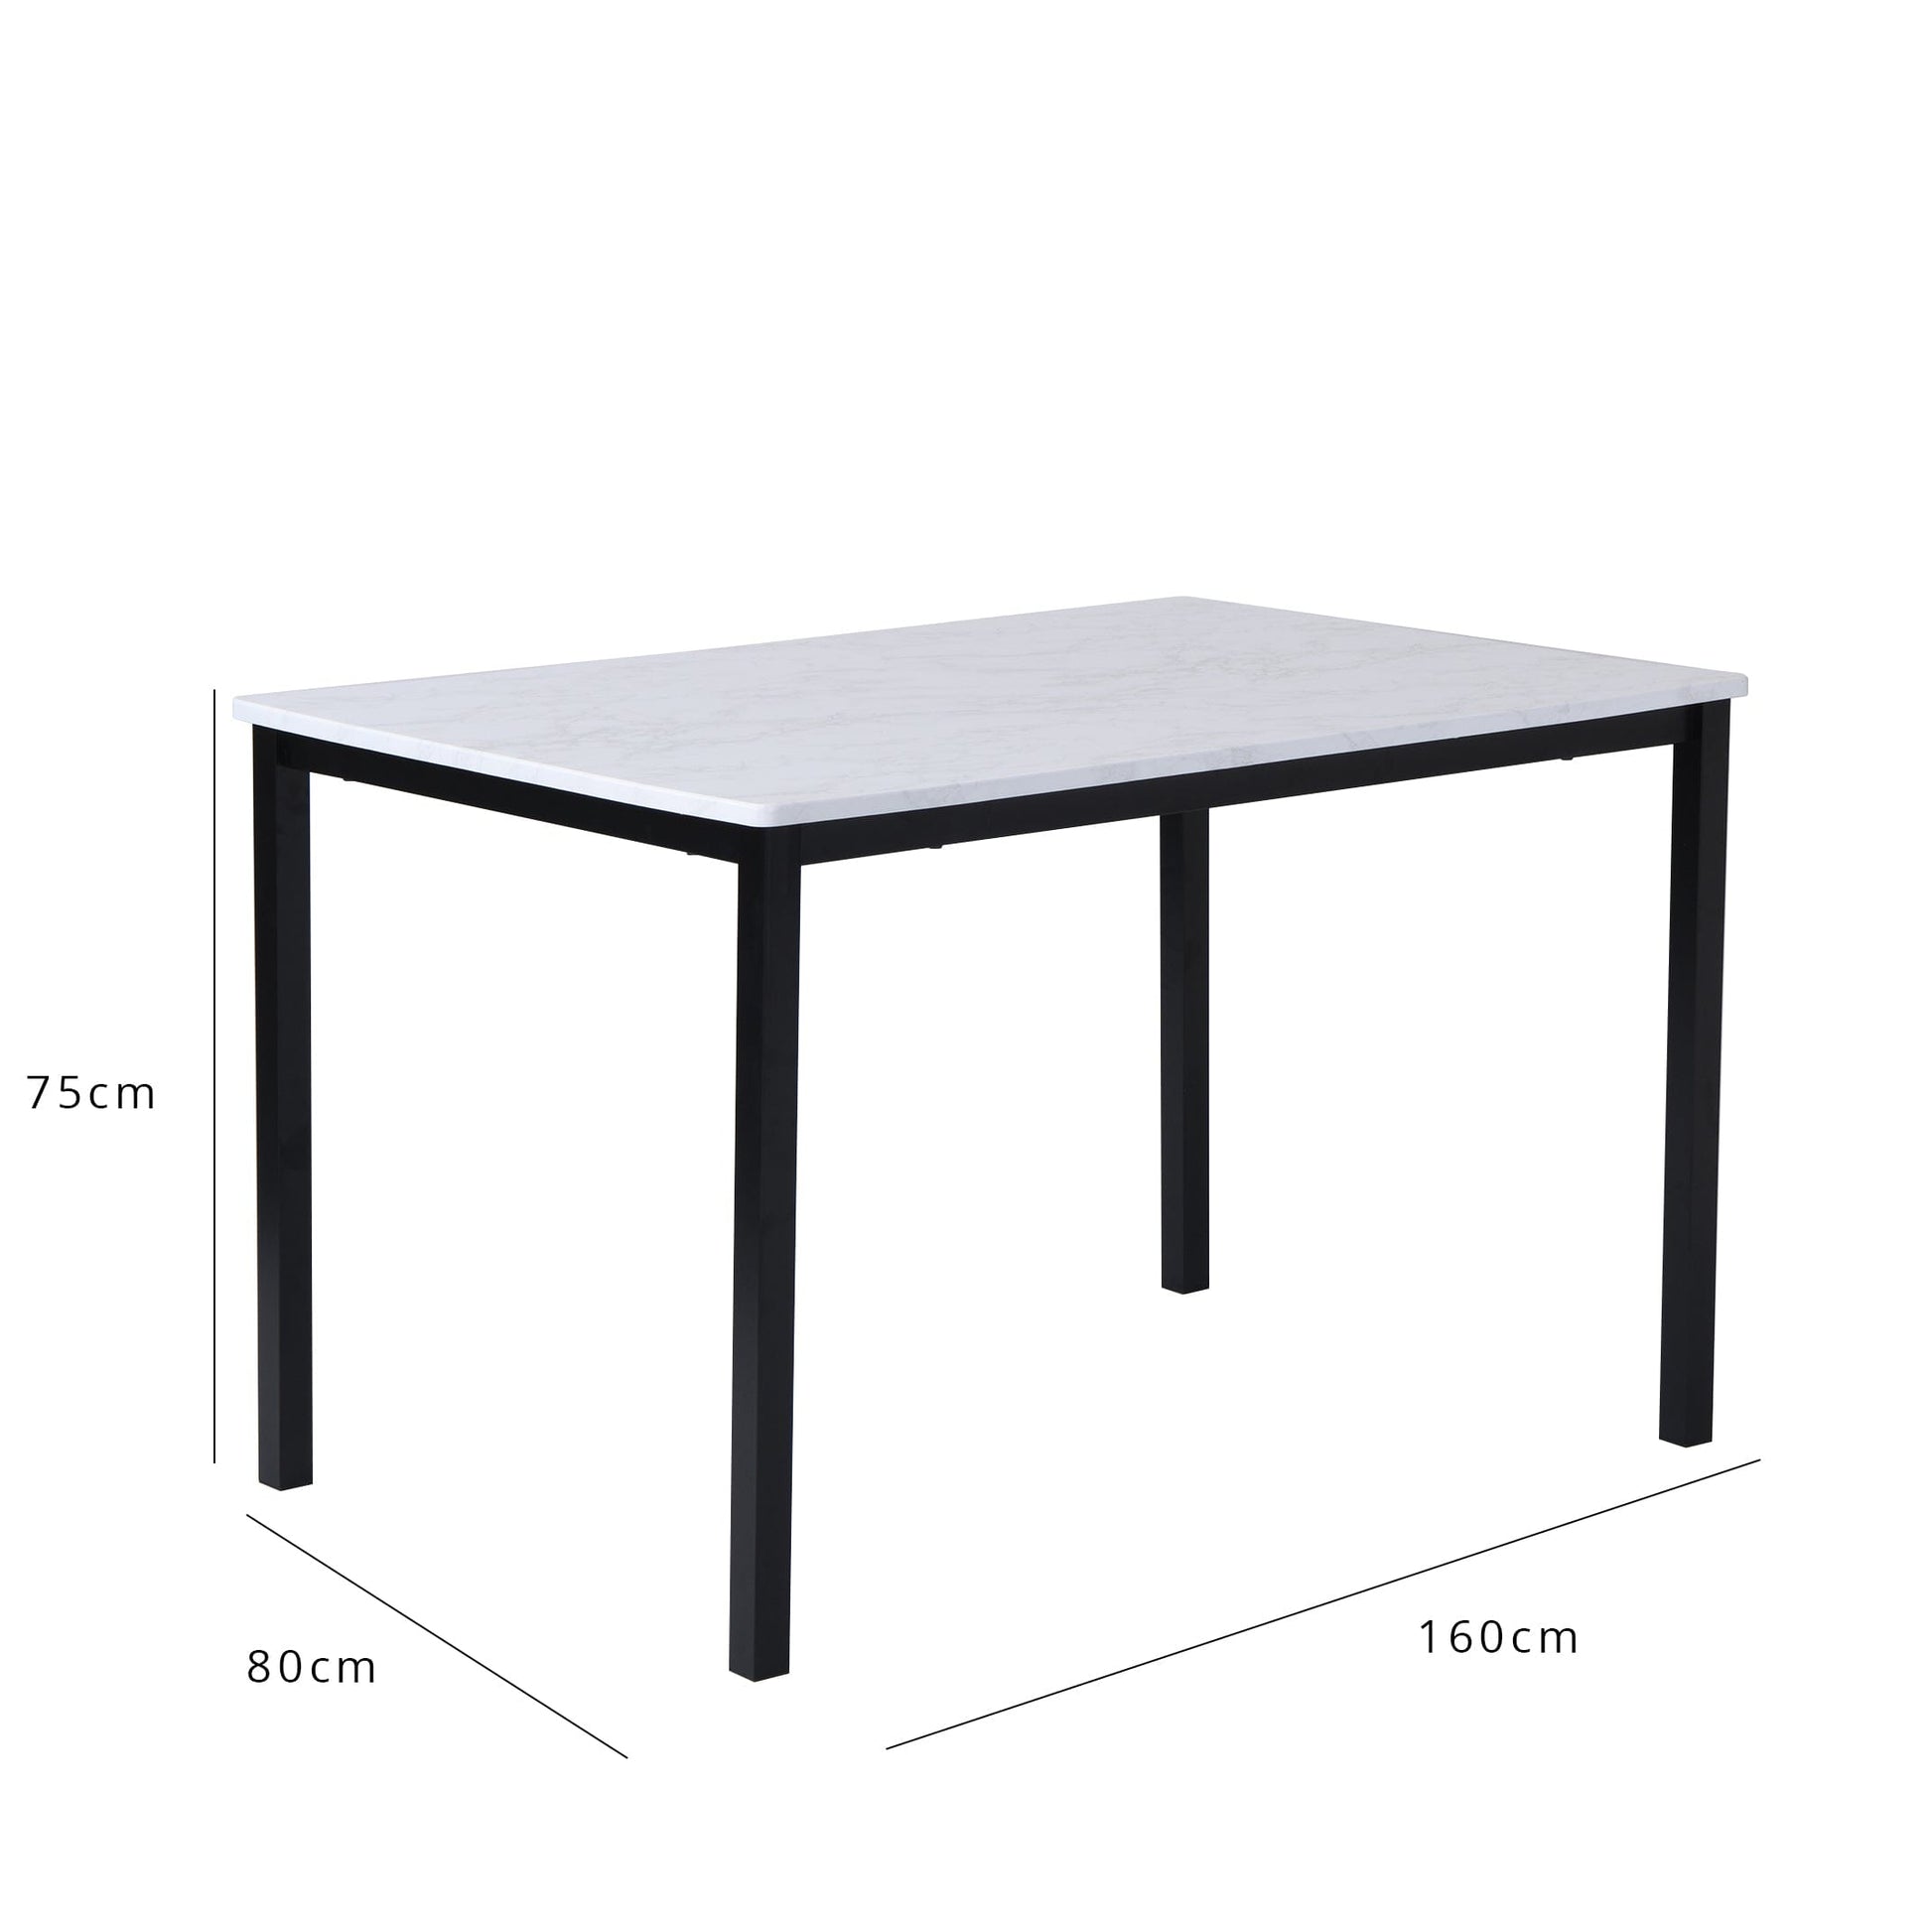 Milo Black Marble Table effect Dining Table Set - 6 seater - Bella Grey and Black  chairs set